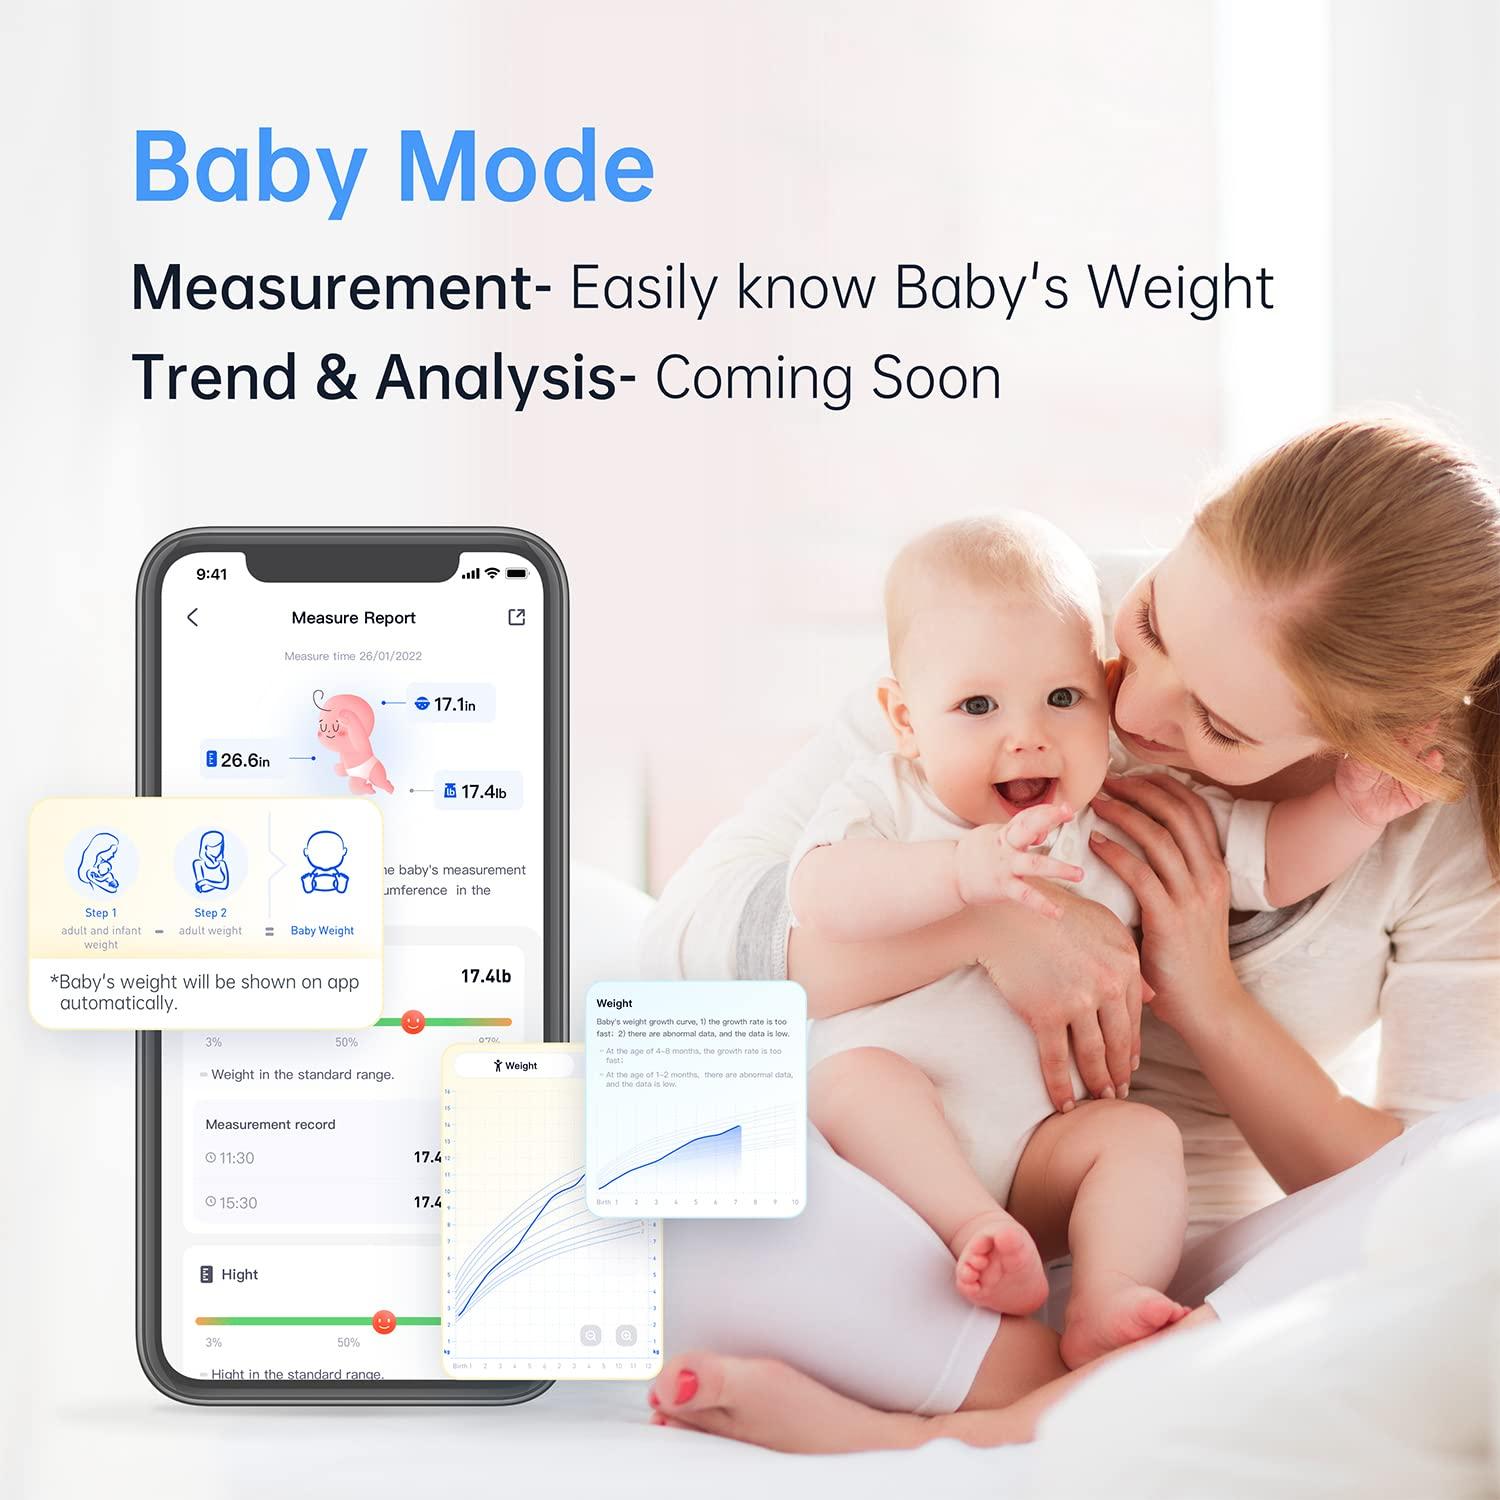 69.99$Smart Scale for Body Weight, 24-Measurement Digital Bathroom Scale  with Accurate Heart Rate, BMI, Muscle Mass Analysis, Smart Bluetooth Scale  Compatible with Apple Health for Fitness : r/testingclub